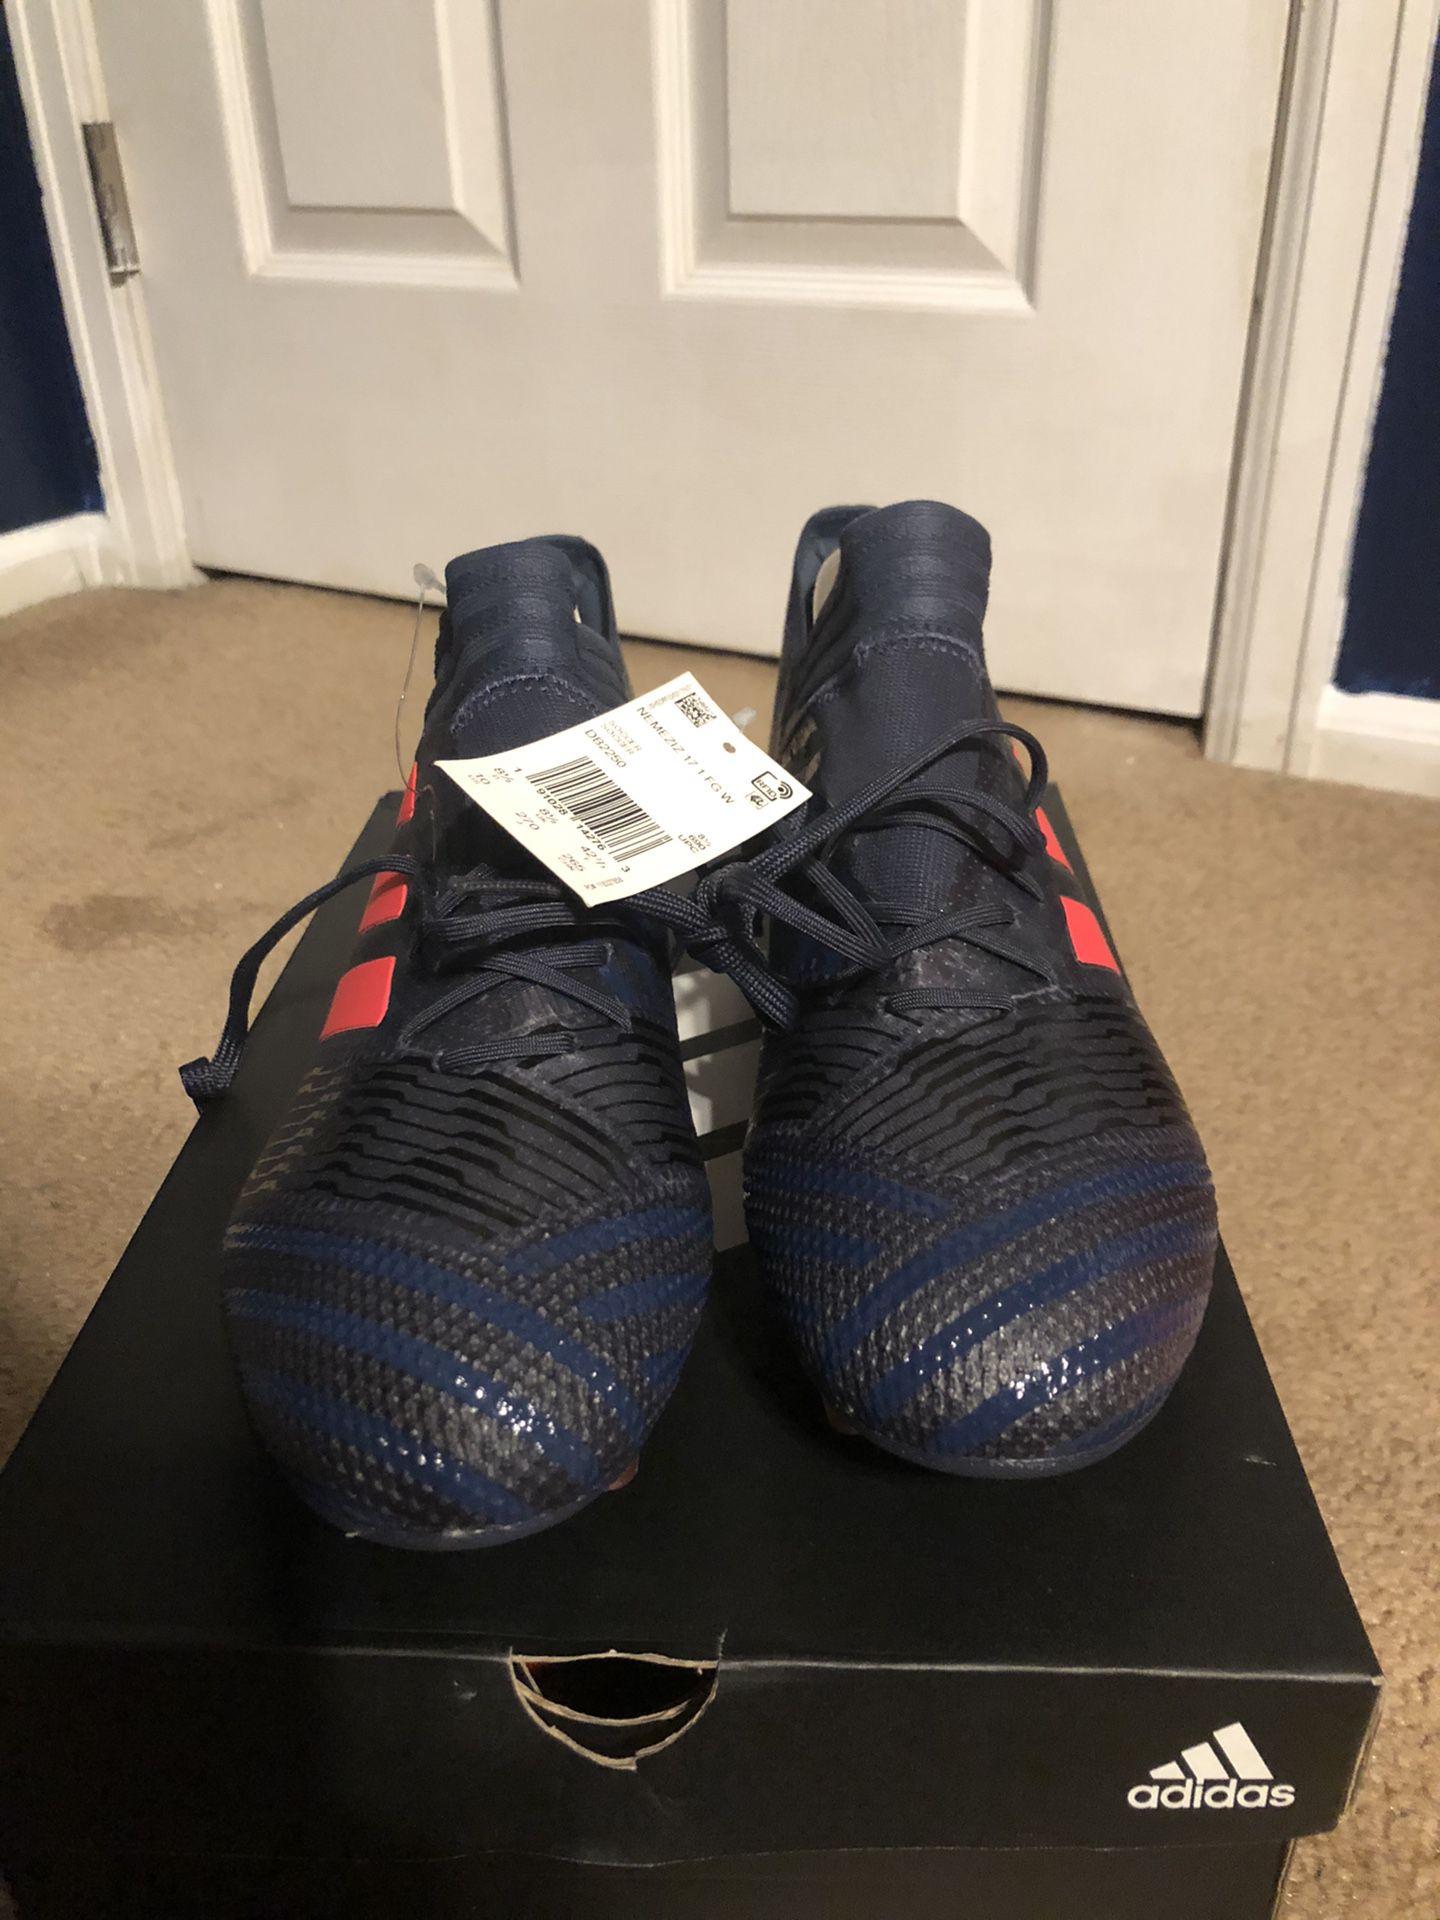 Soccer cleats for sale